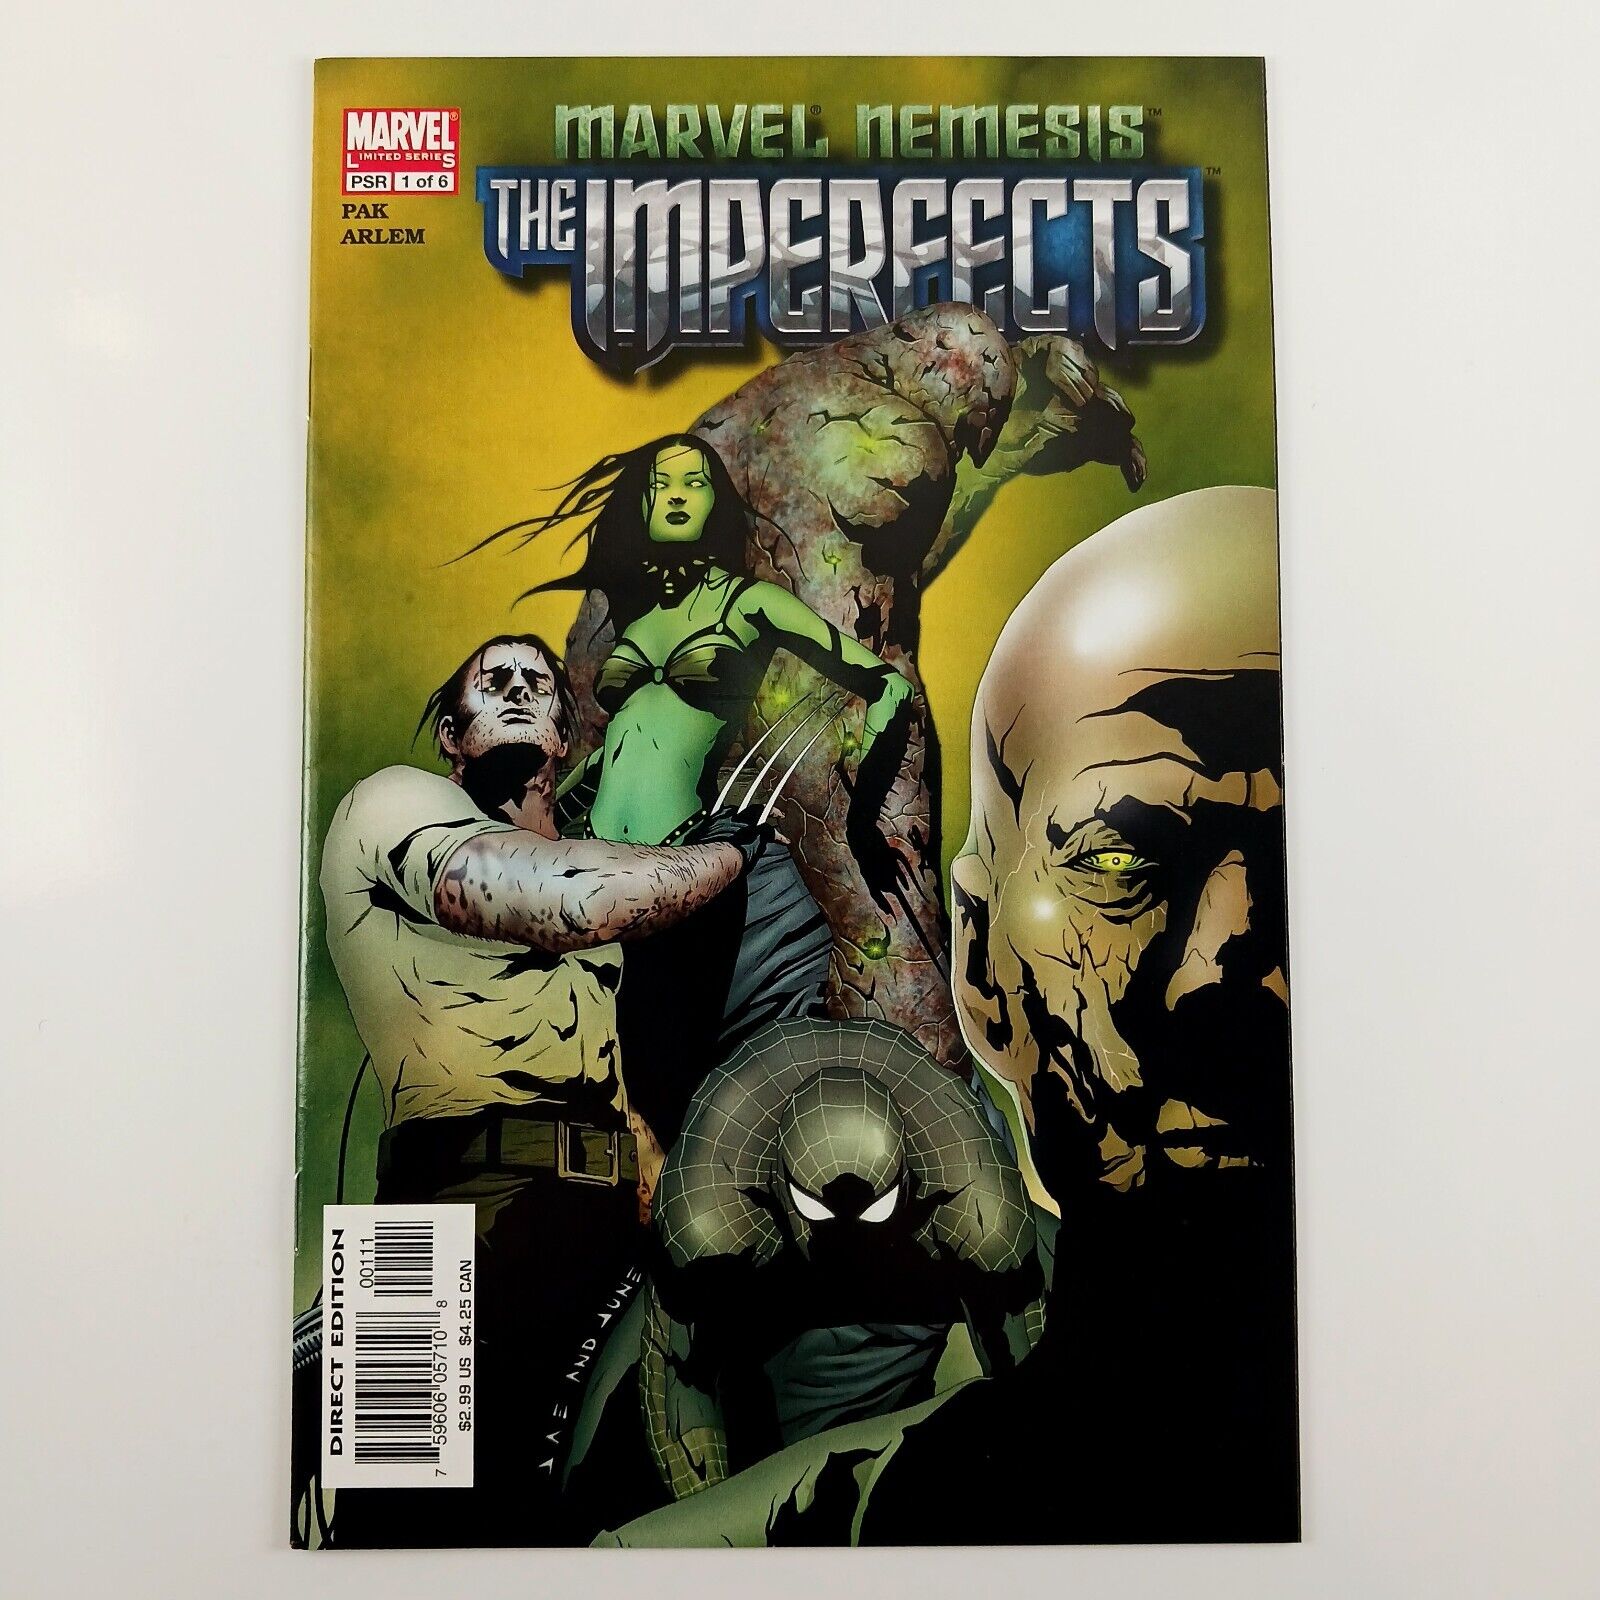 Marvel Nemesis The Imperfects #1 - Marvel Comics - 2005 - Rise of the Imperfects